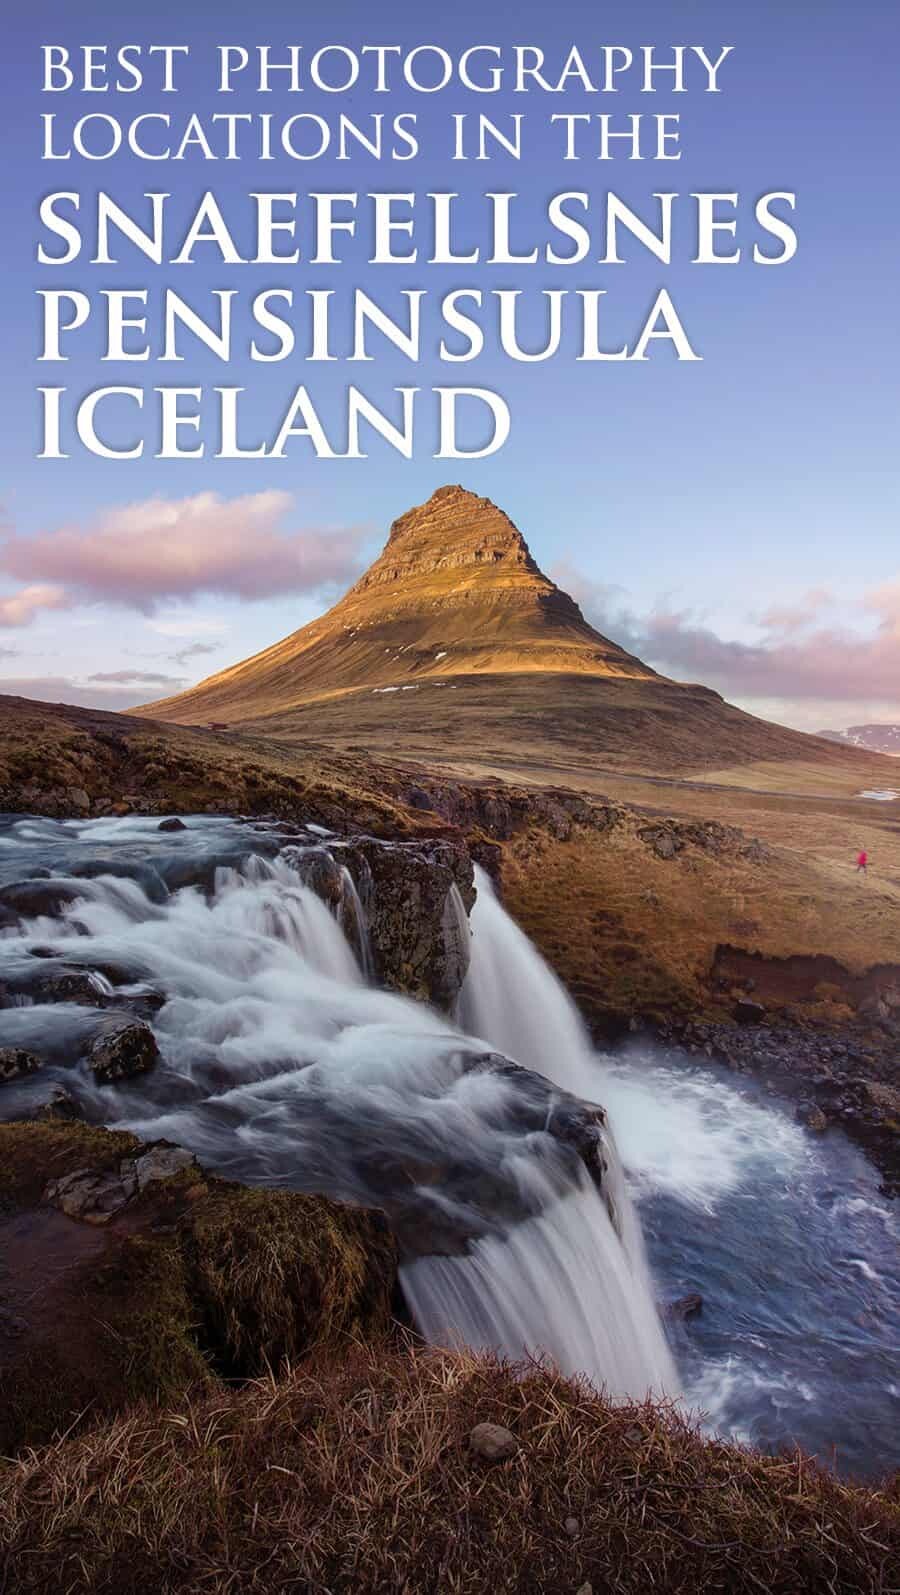 Iceland West coast photography locations along the Snaefellsnes Peninsula by The Wandering Lens